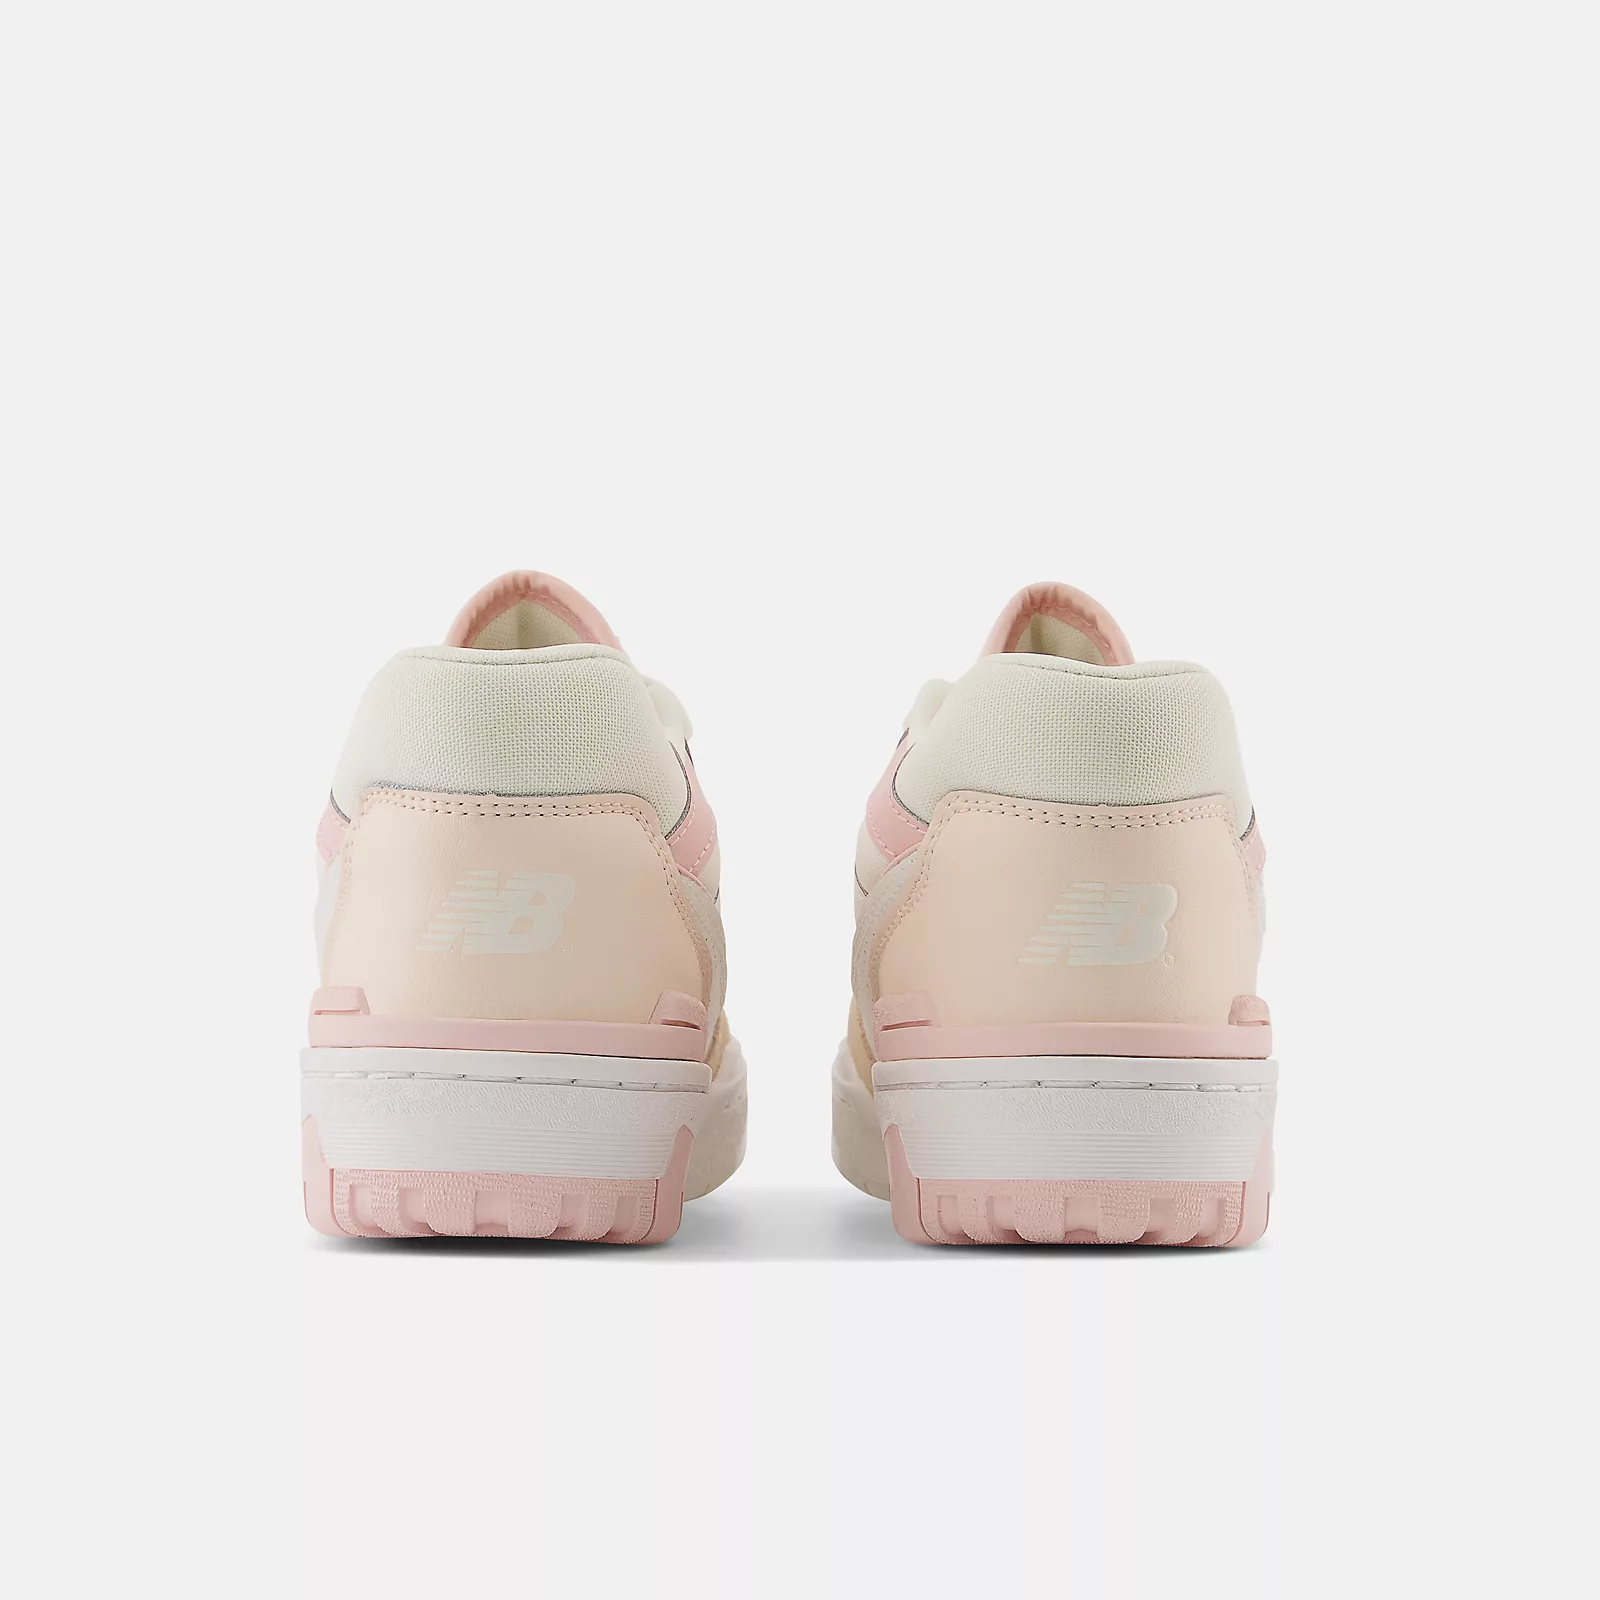 New Balance 550 White Pink - Lit Fitters Portugal